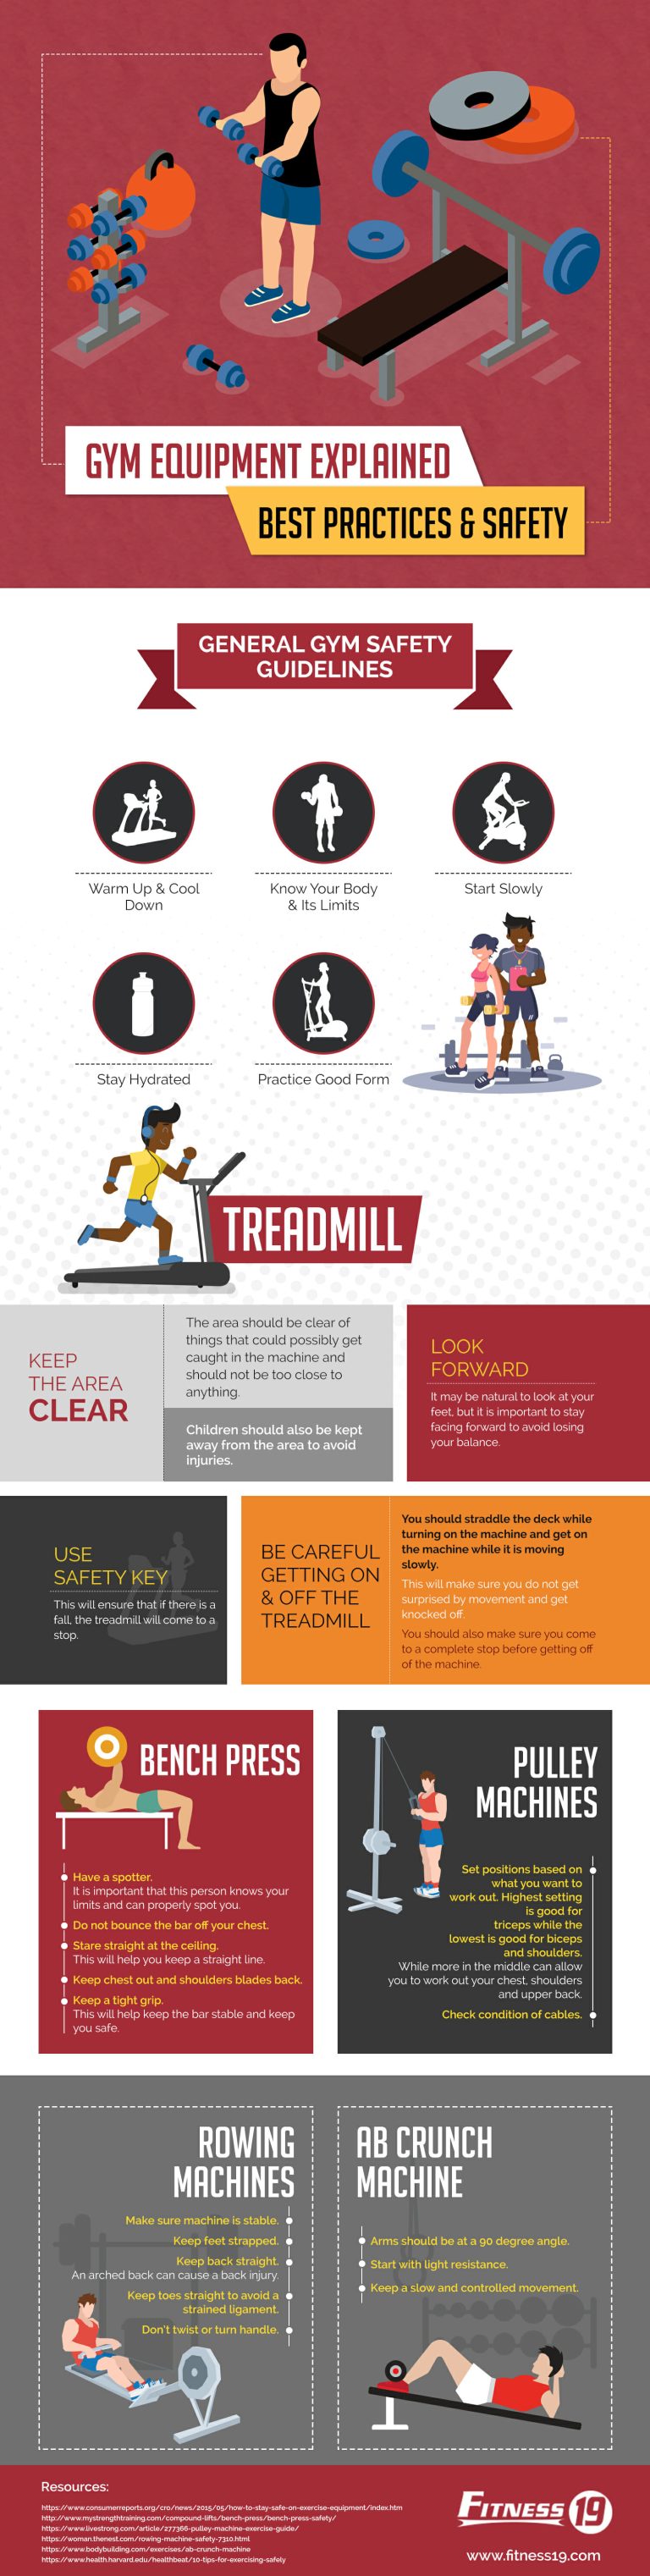 Gym-Equipment-Explained-Best-Practices-and-Safety-1